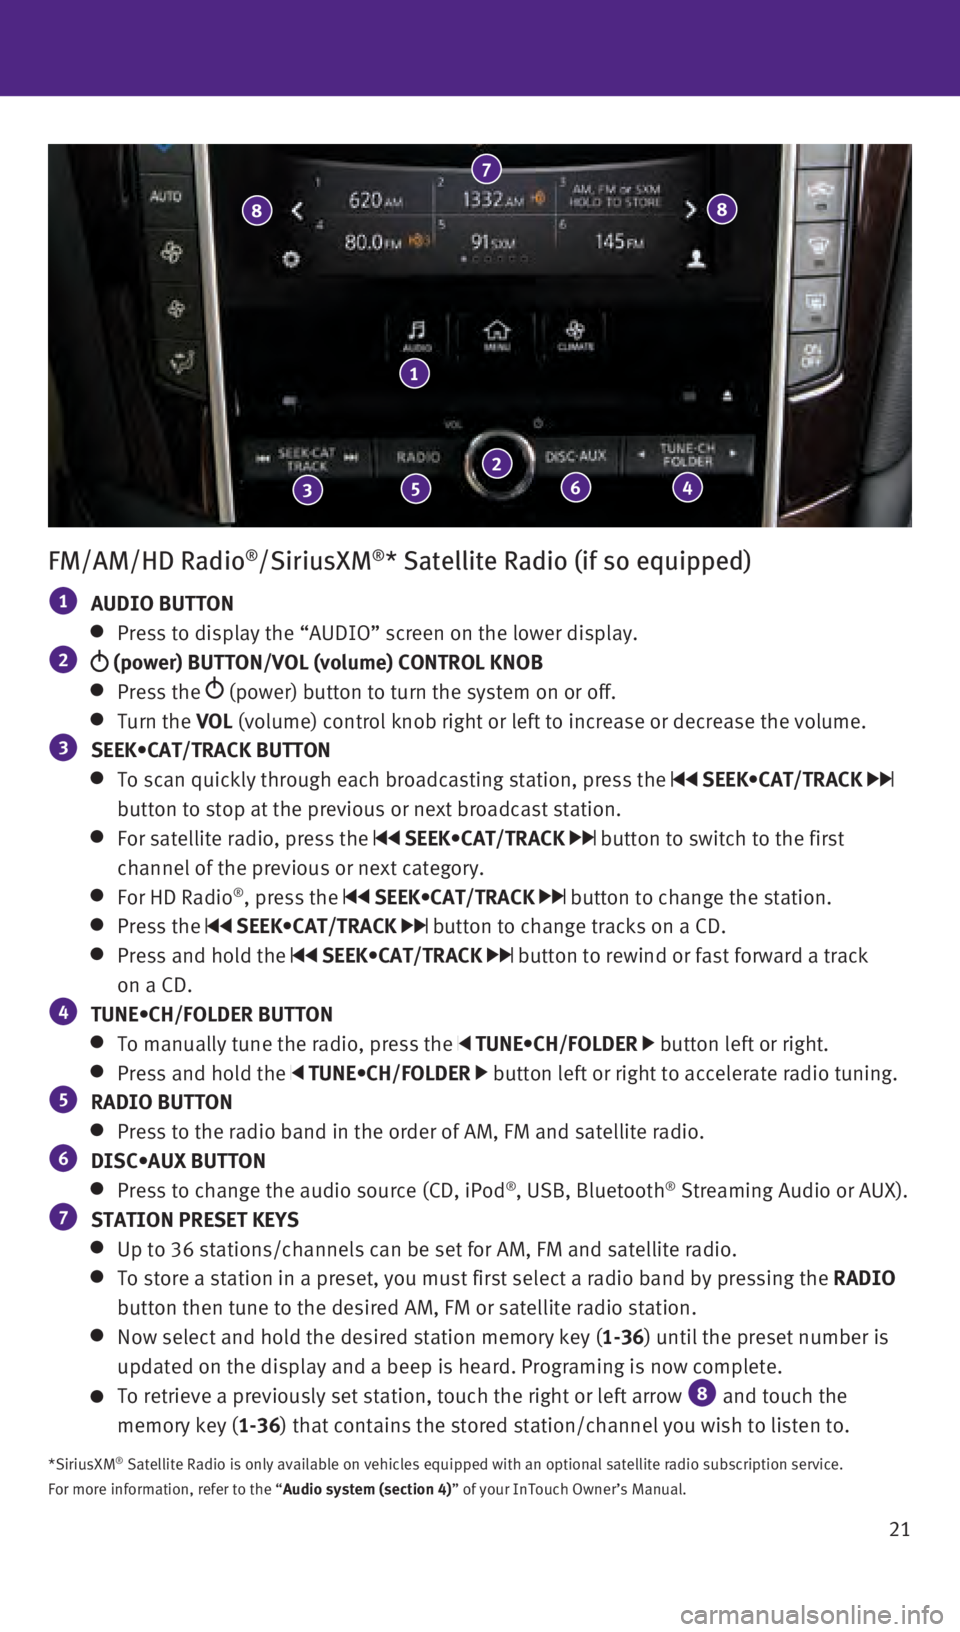 INFINITI Q50 2016  Quick Reference Guide 21
FM/AM/HD Radio®/SiriusXM®* Satellite Radio (if so equipped)
 1  AUDIO BUTTON
   Press to display the “AUDIO” screen on the lower display. 2   (power) BUTTON/VOL (volume) CONTROL KNOB
     Pre